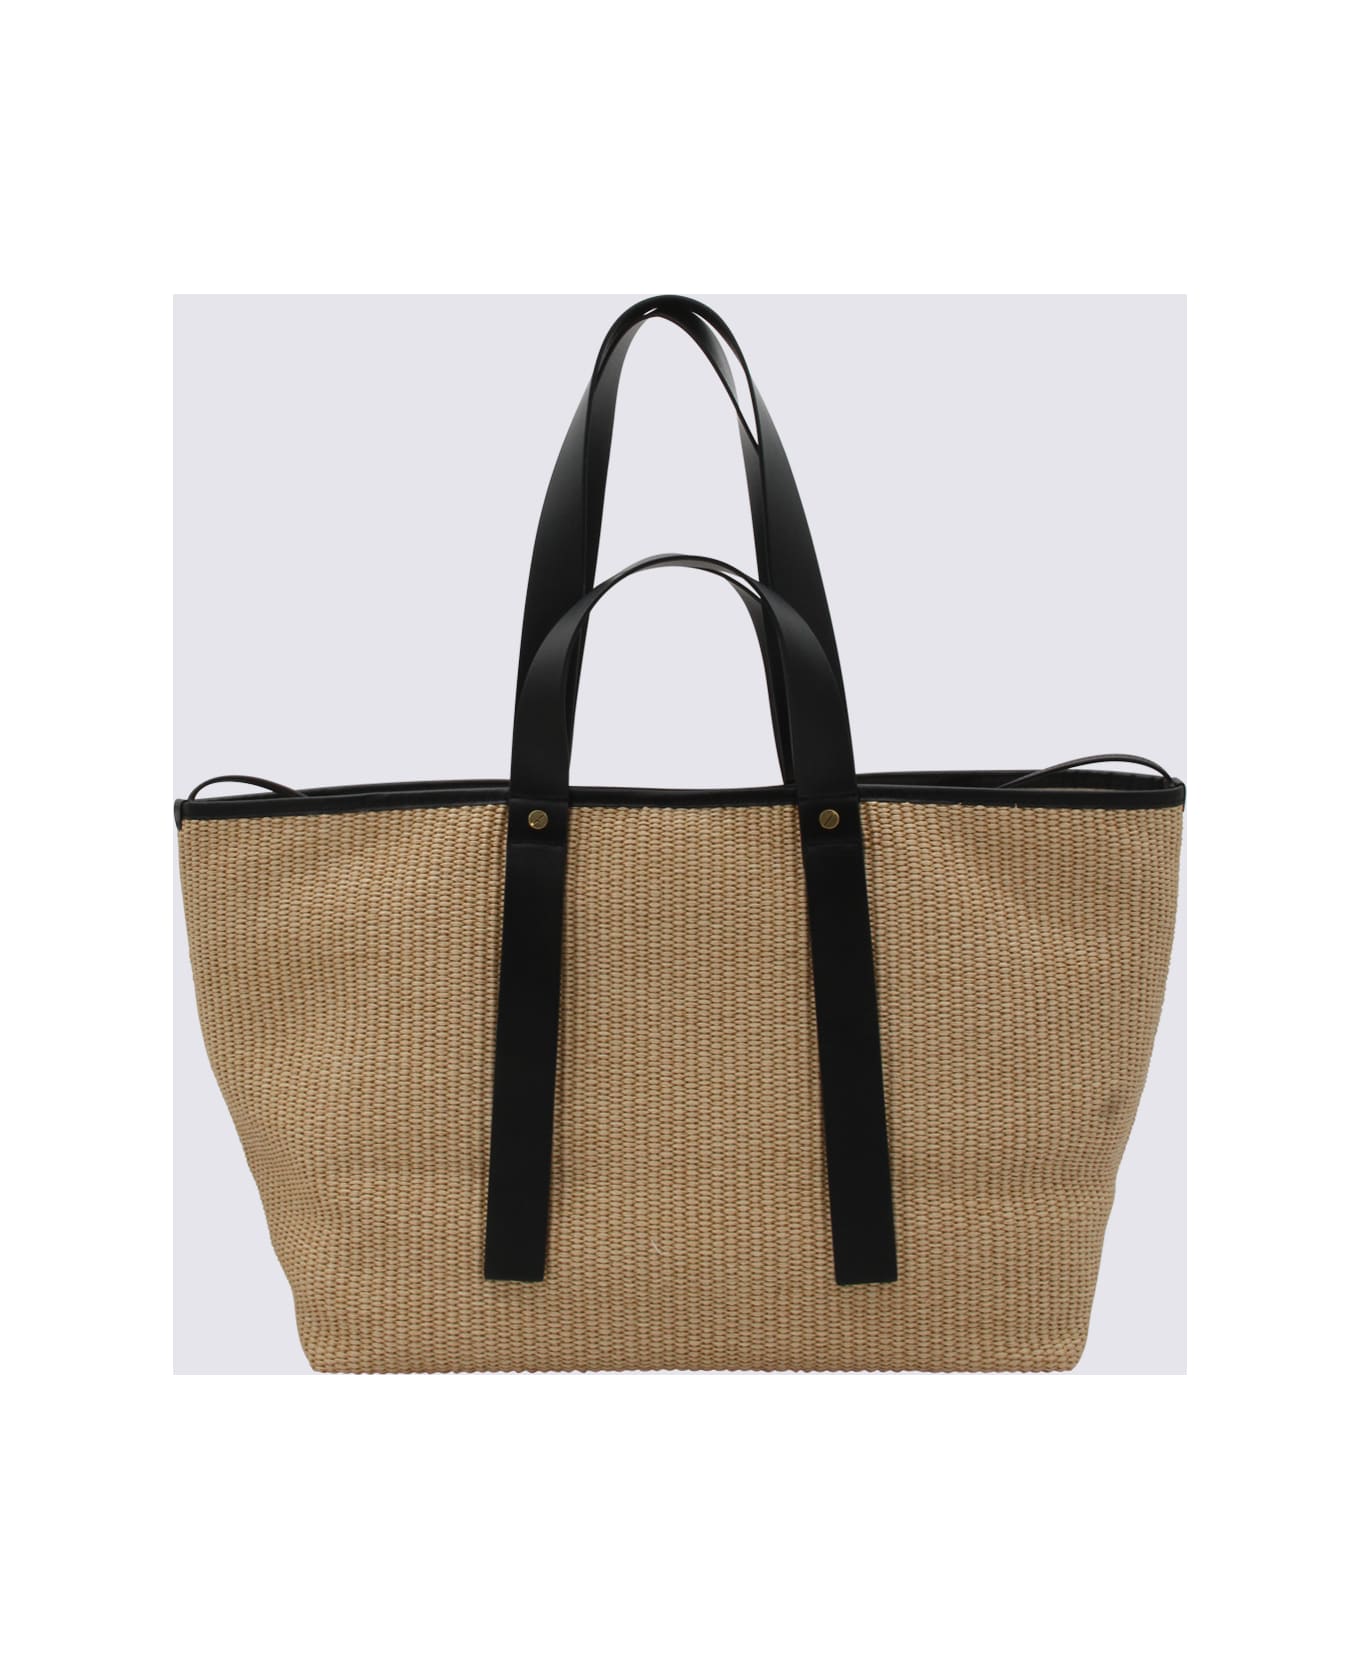 Off-White Beige Raffia And Black Leather Arrows Tote Bag - Beige トートバッグ